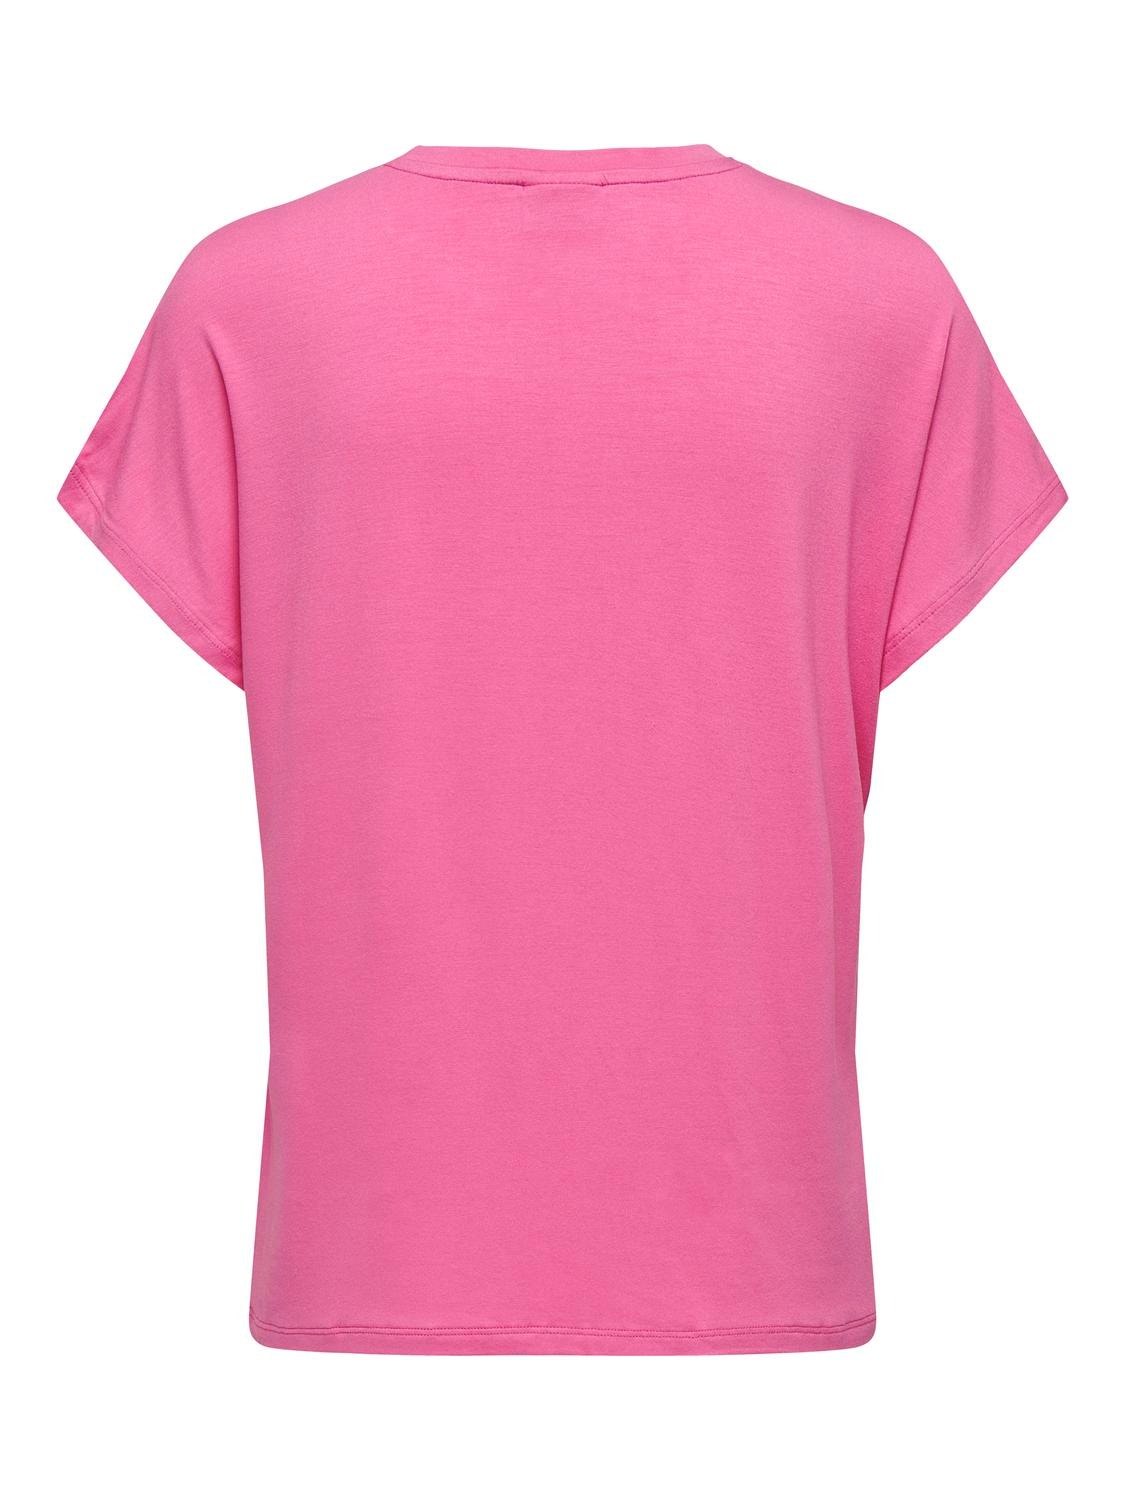 ONLY Regular fit O-hals Top -Pink Power - 15257232